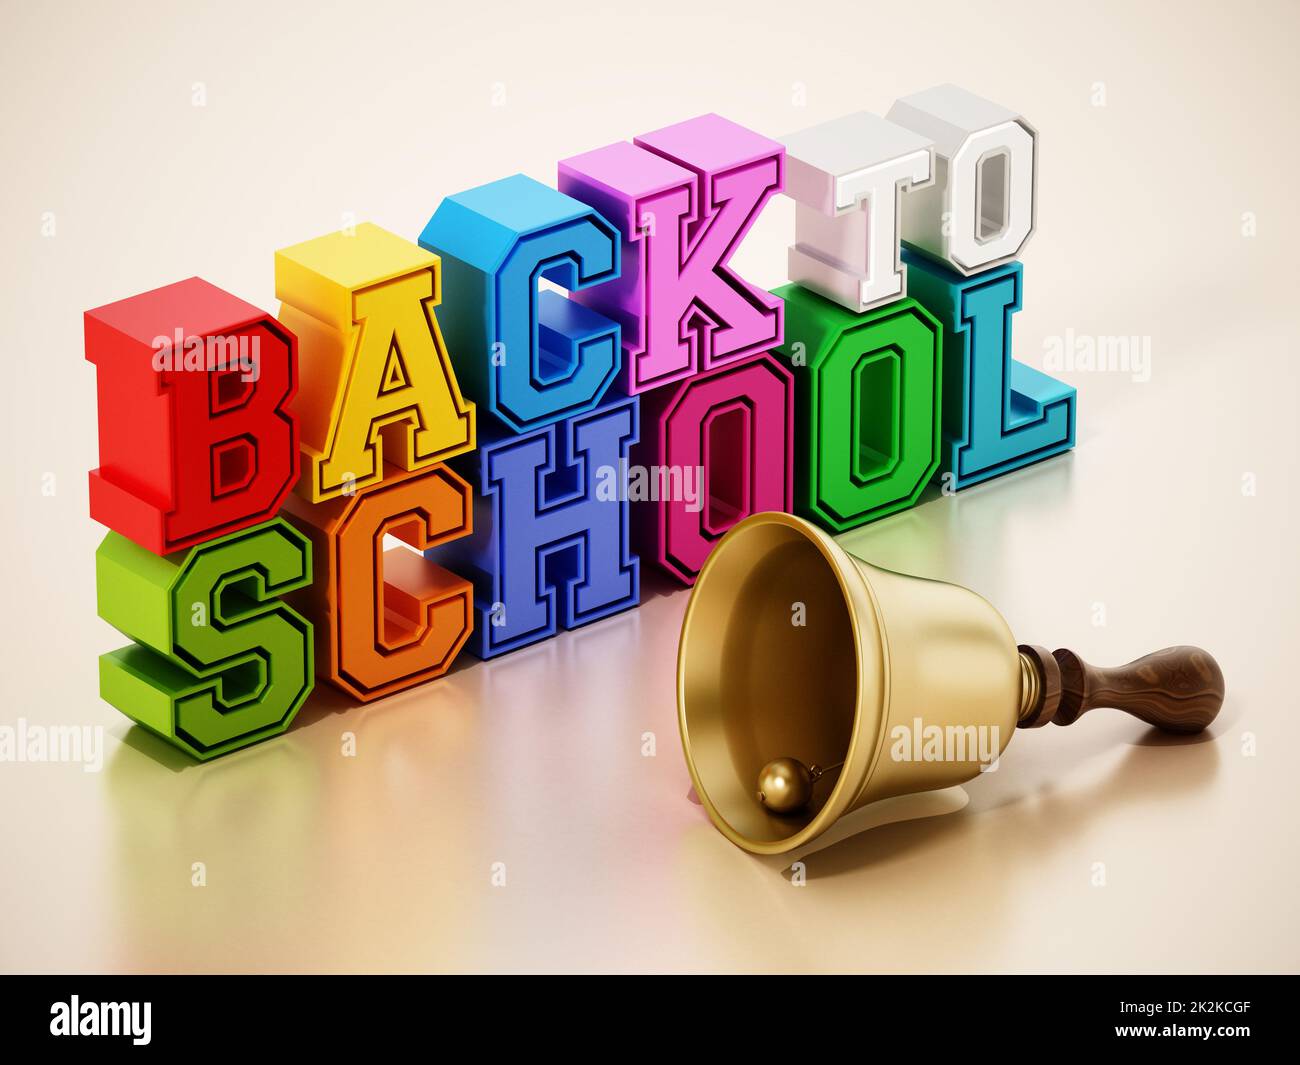 Back to school text and school bell on reflective surface. 3D illustration Stock Photo